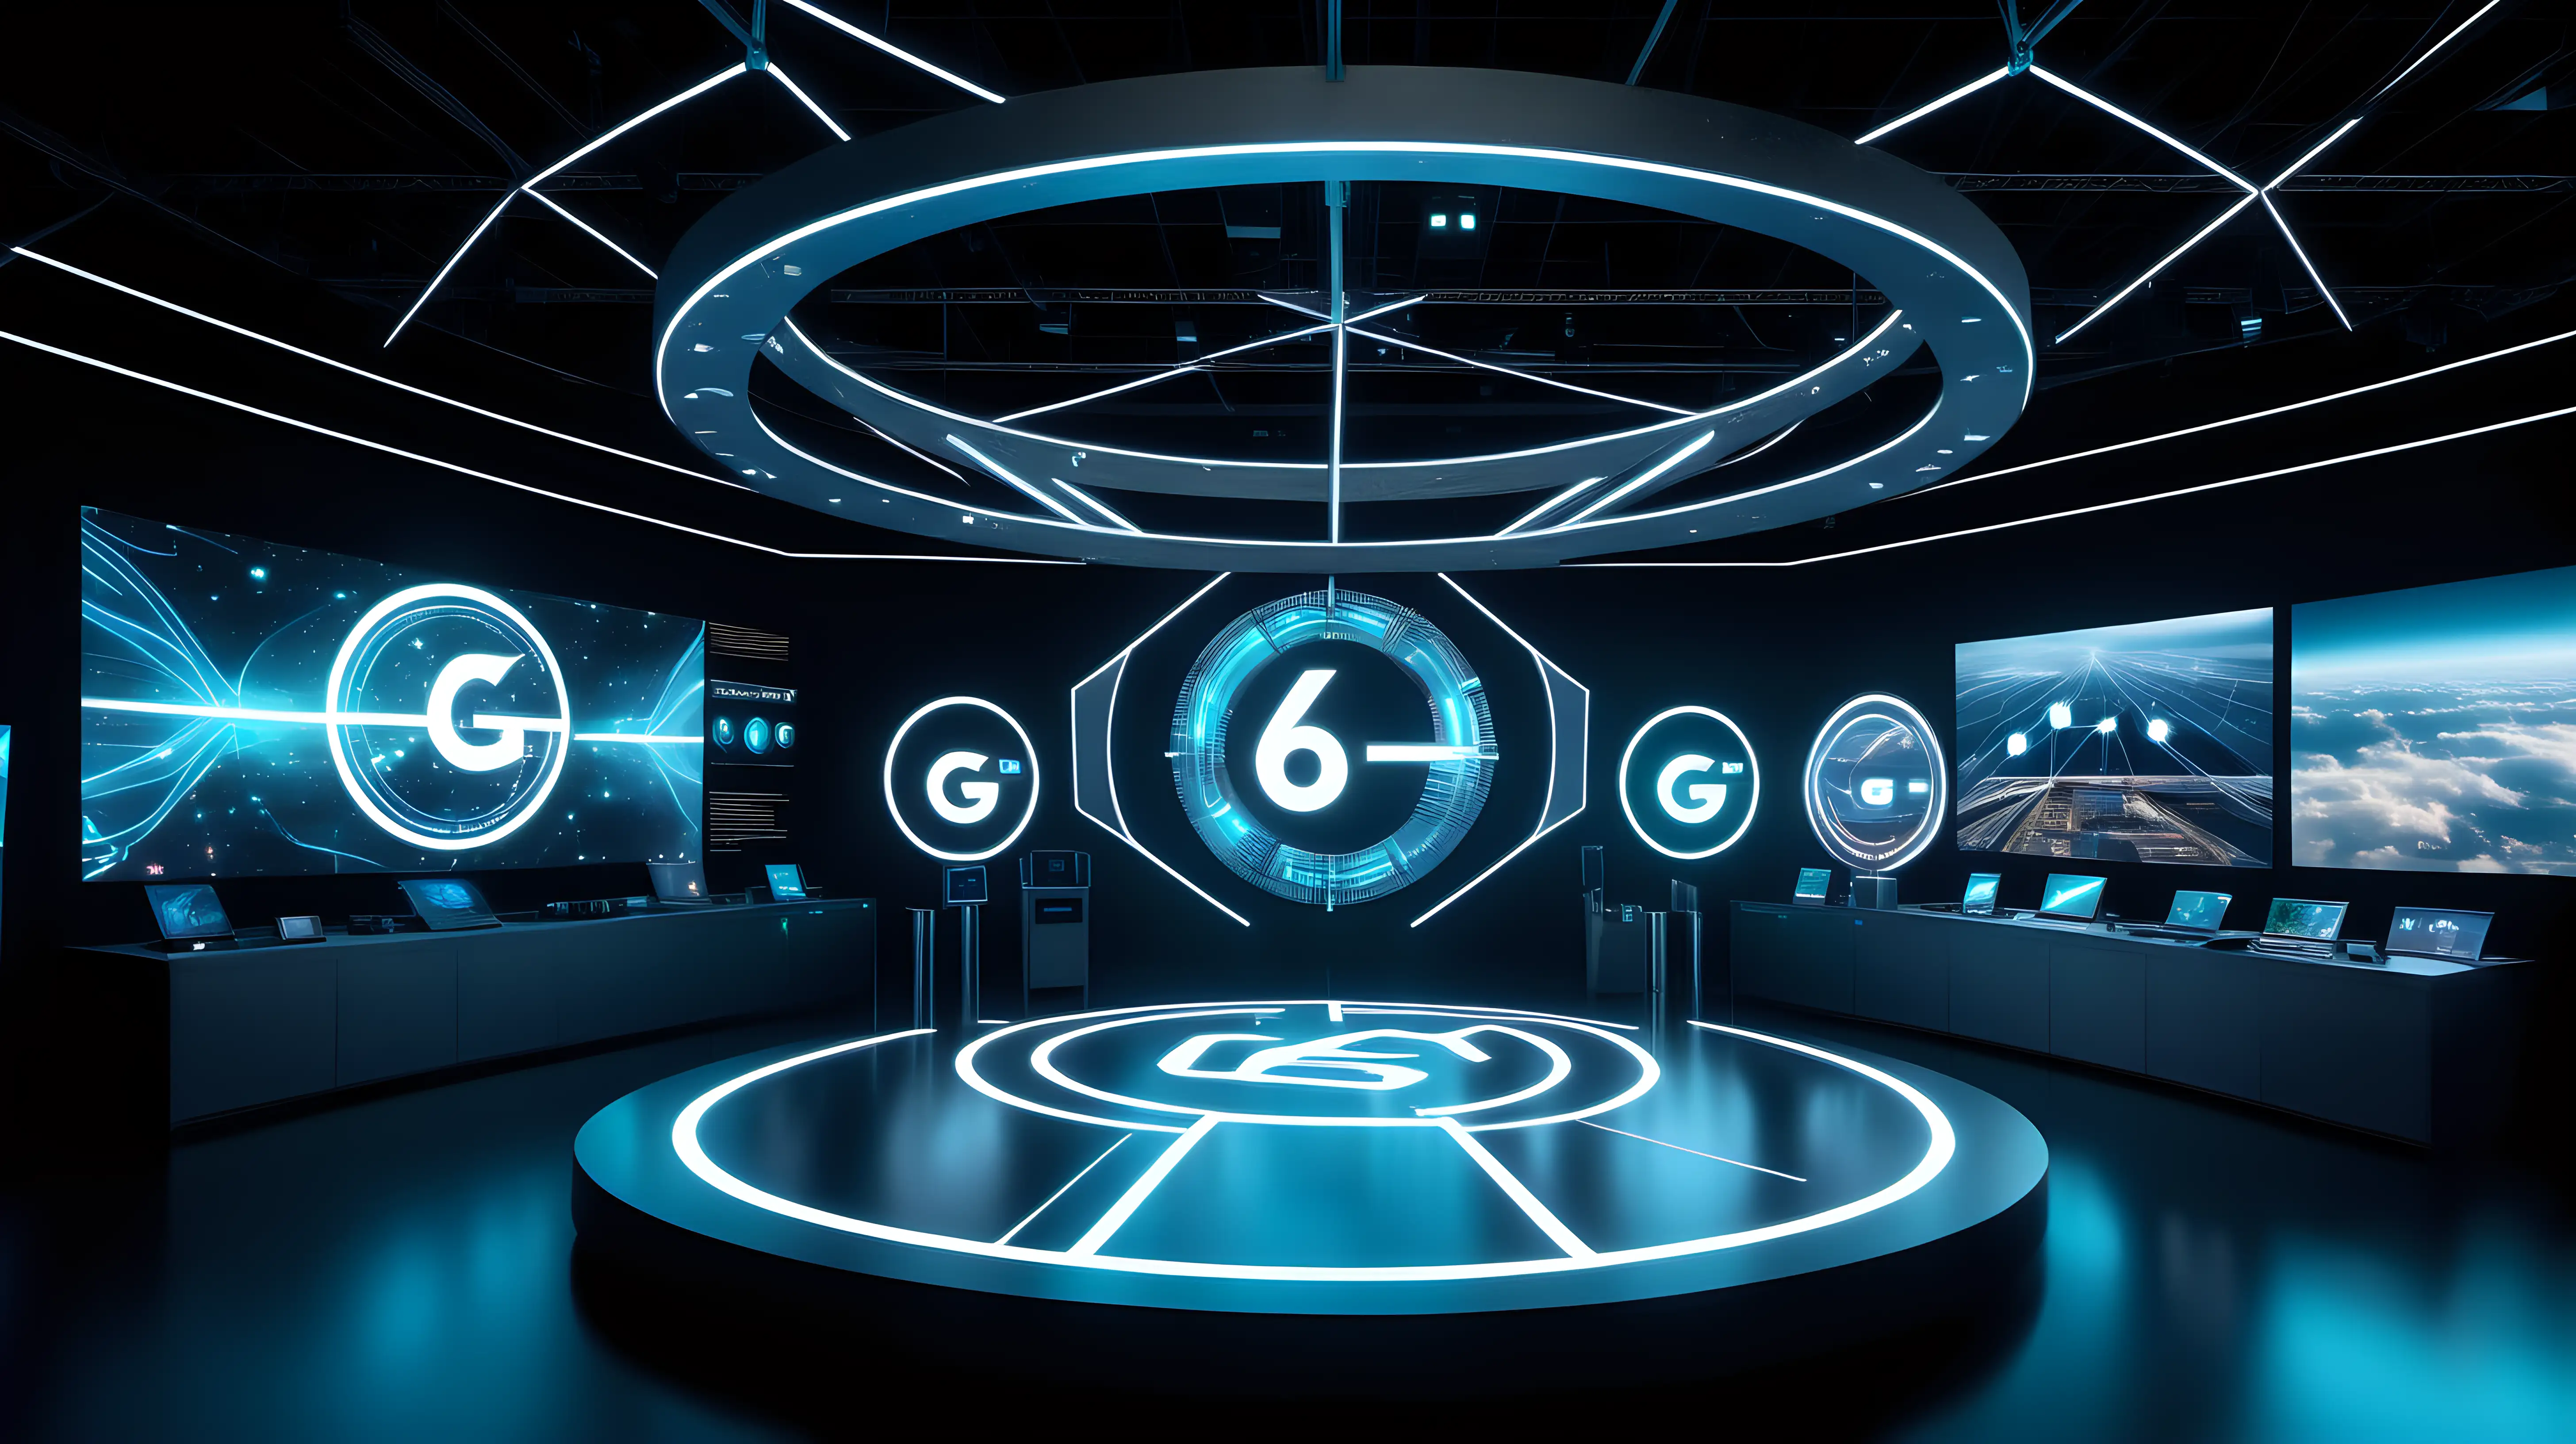 An advanced communication hub with holographic displays, drones, and the central emphasis on the glowing "6G" logo, representing the next era of connectivity.